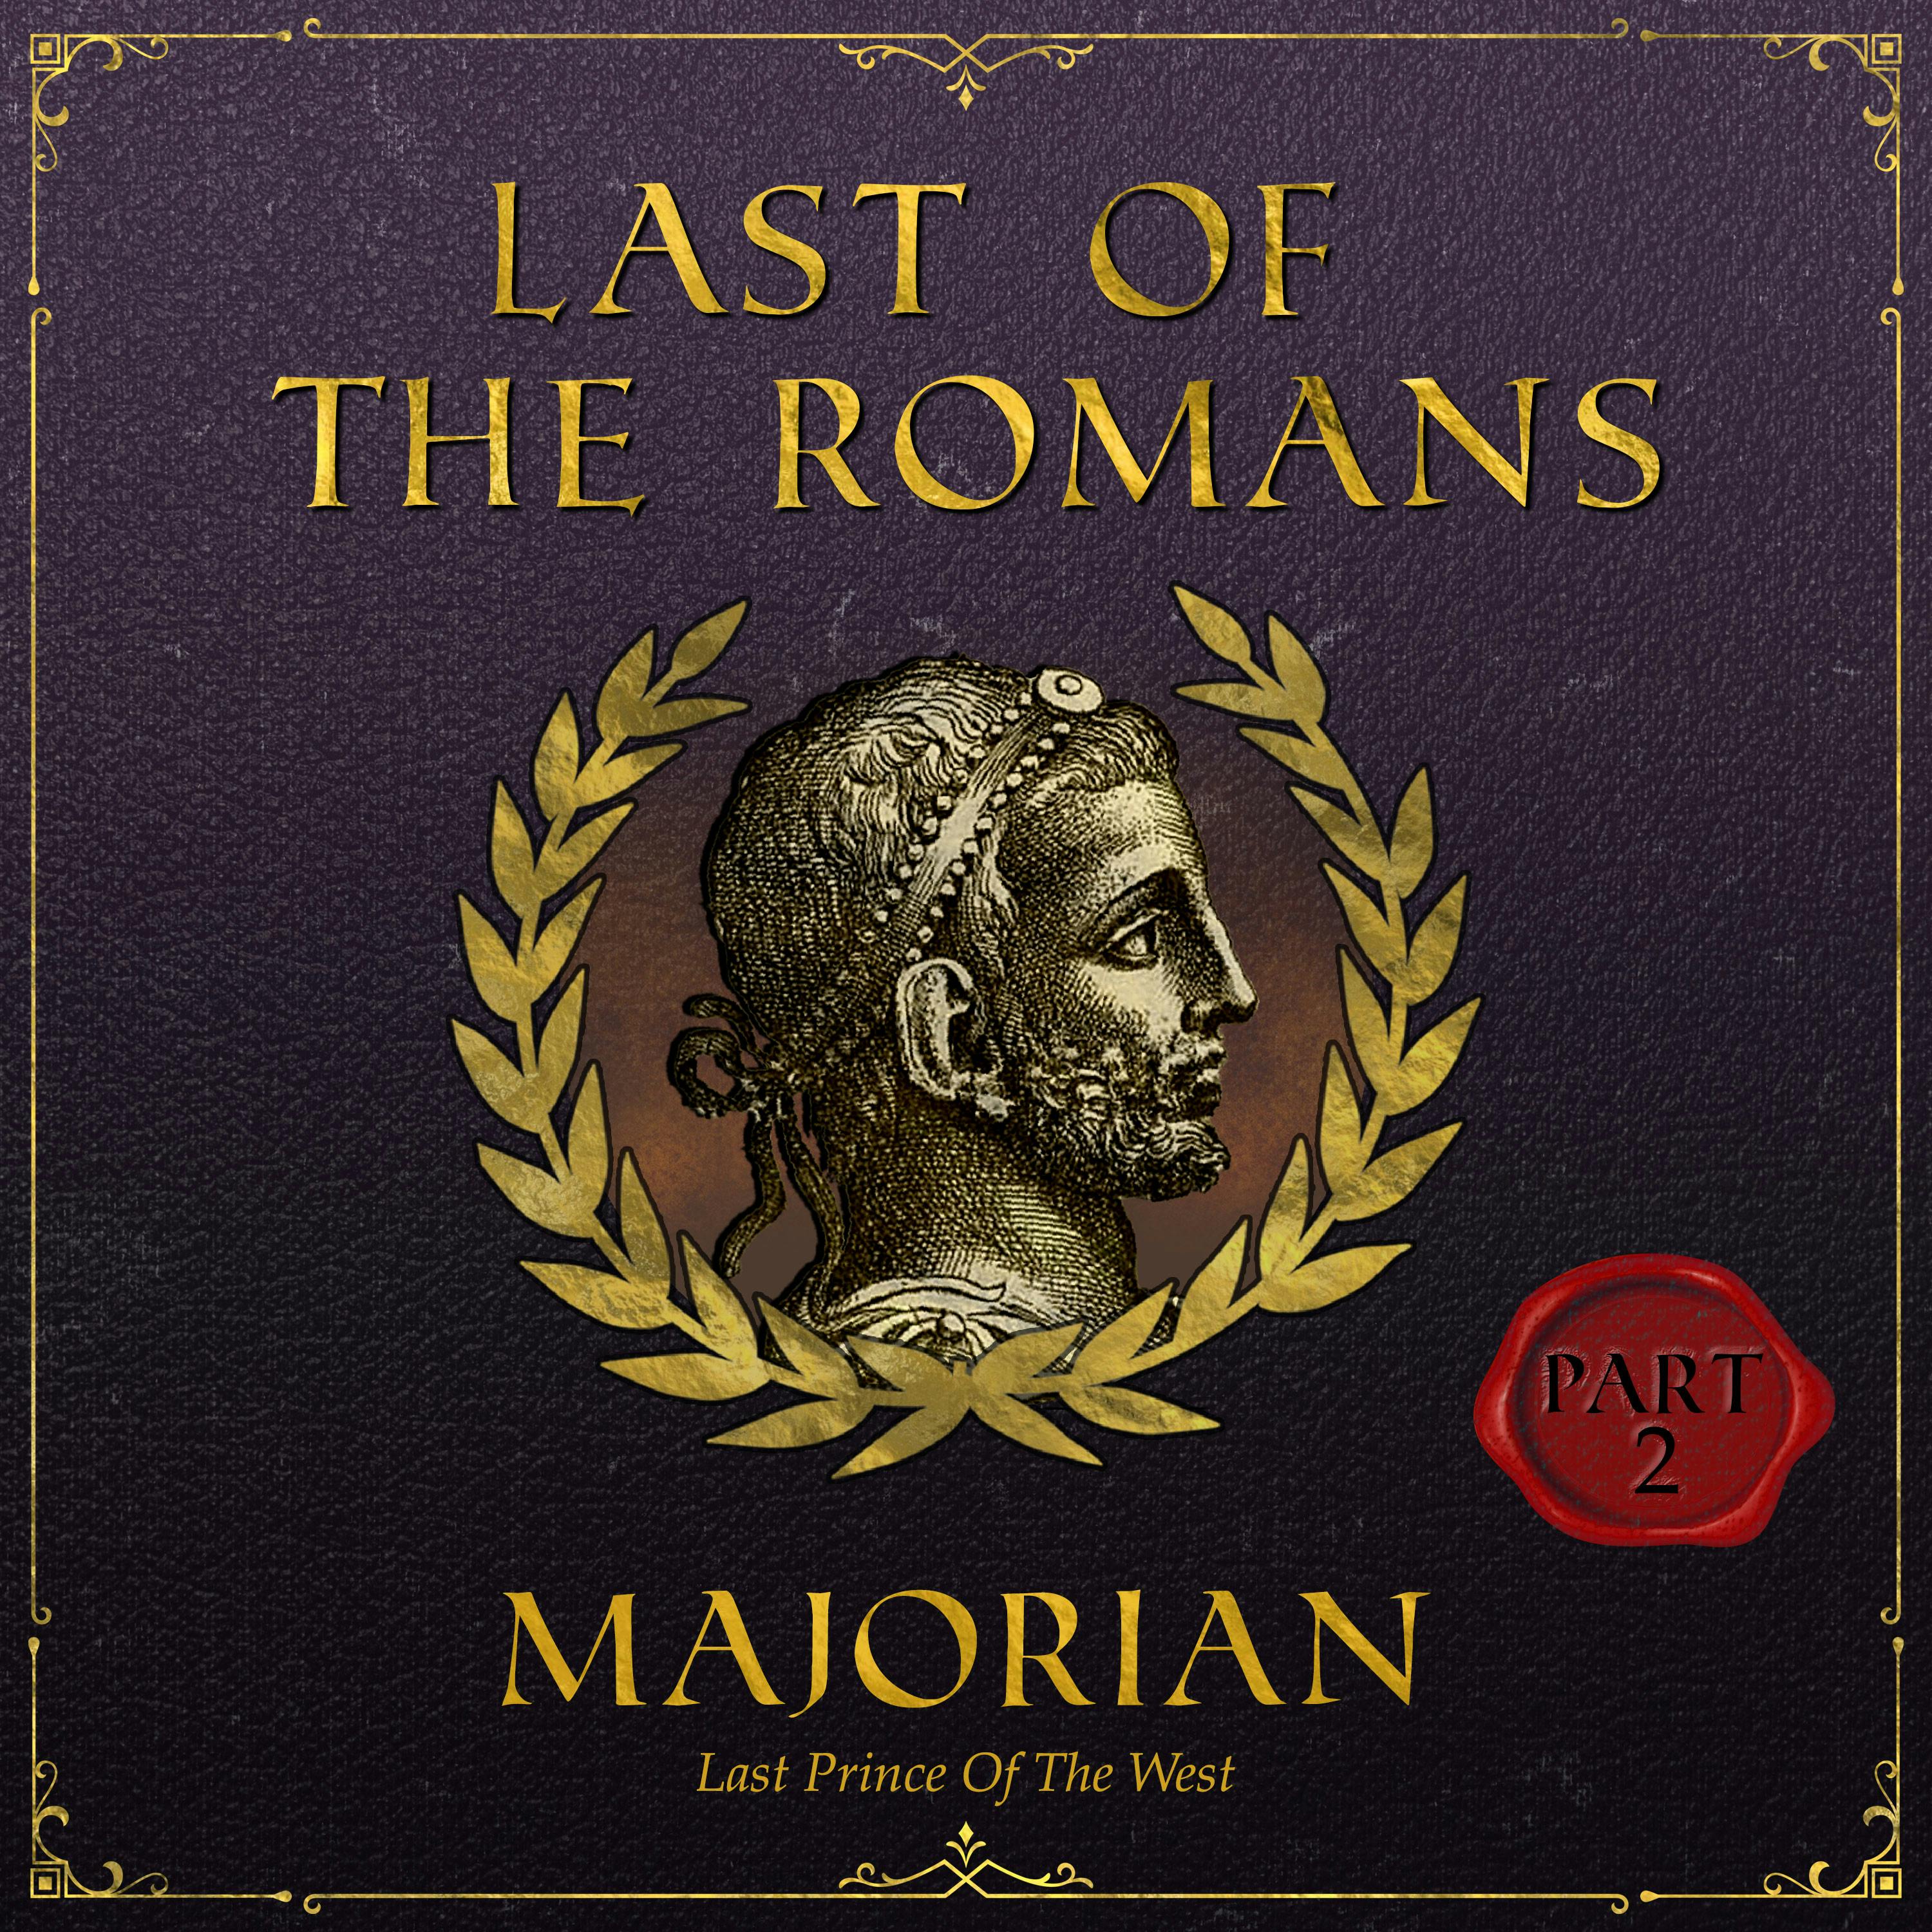 The Rise and Fall of Majorian | Part 2: Downfall of the Roman Empire Image